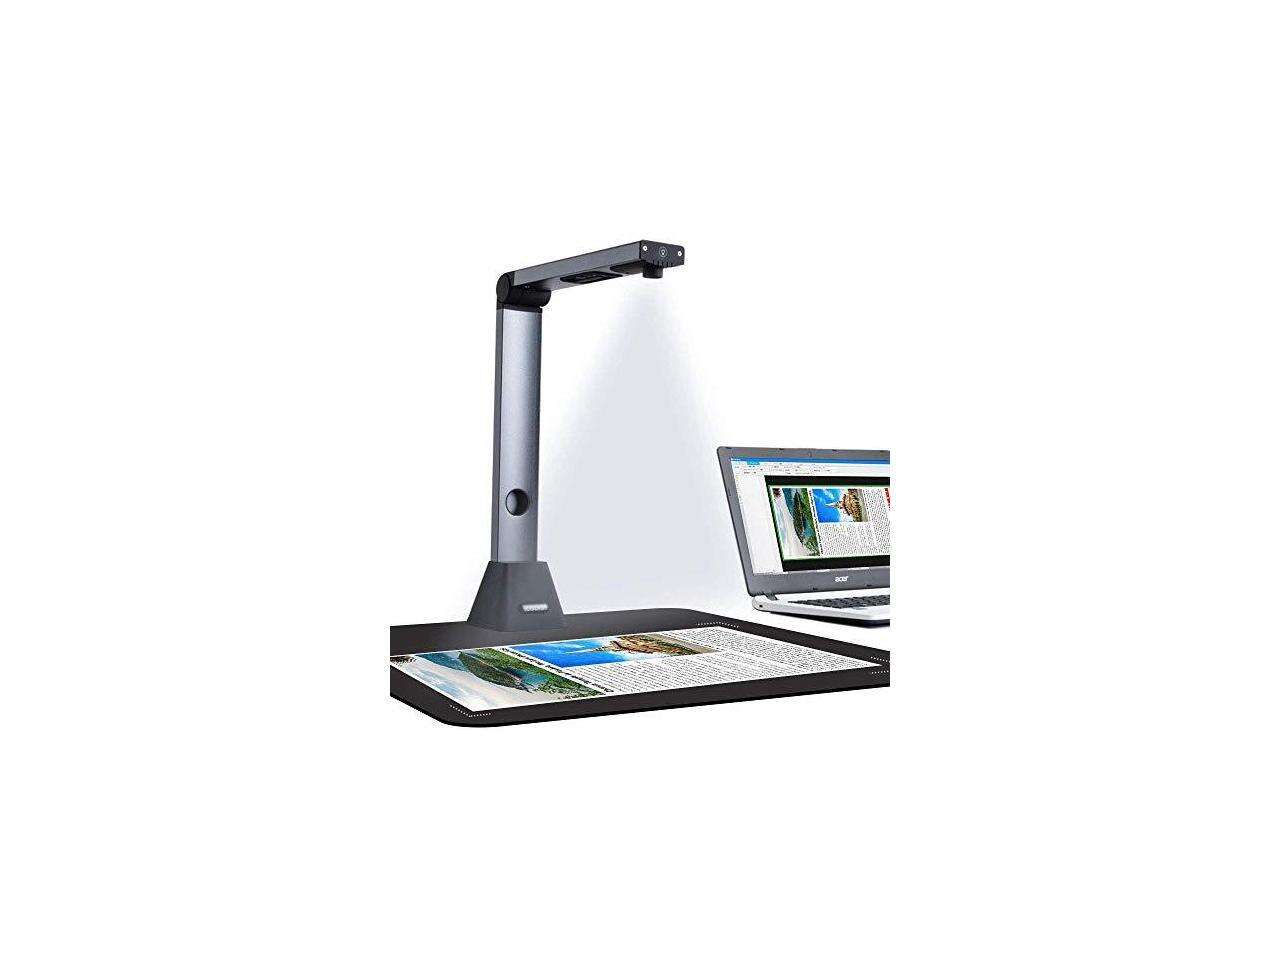 Document Camera X3 High Definition Portable Scanner Capture Size A3 MultiLanguage OCR English Article Recognition USB SDK Twain Powerful Software